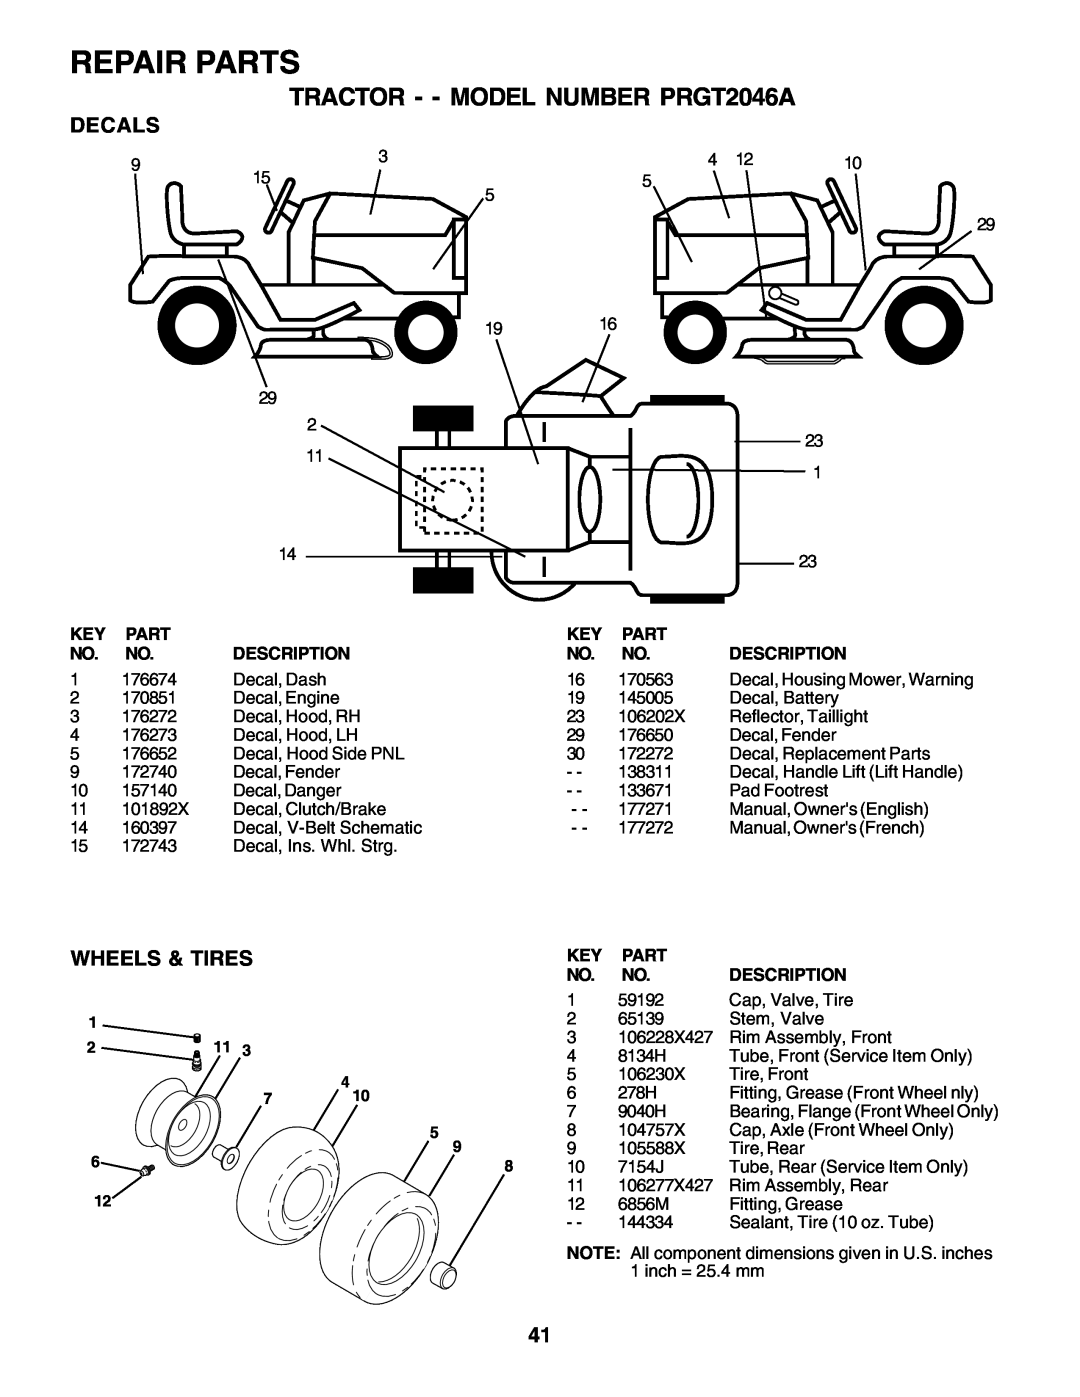 Poulan 177271 Repair Parts, TRACTOR - - MODEL NUMBER PRGT2046A, Decals, Wheels & Tires, Decal, Housing Mower, Warning 